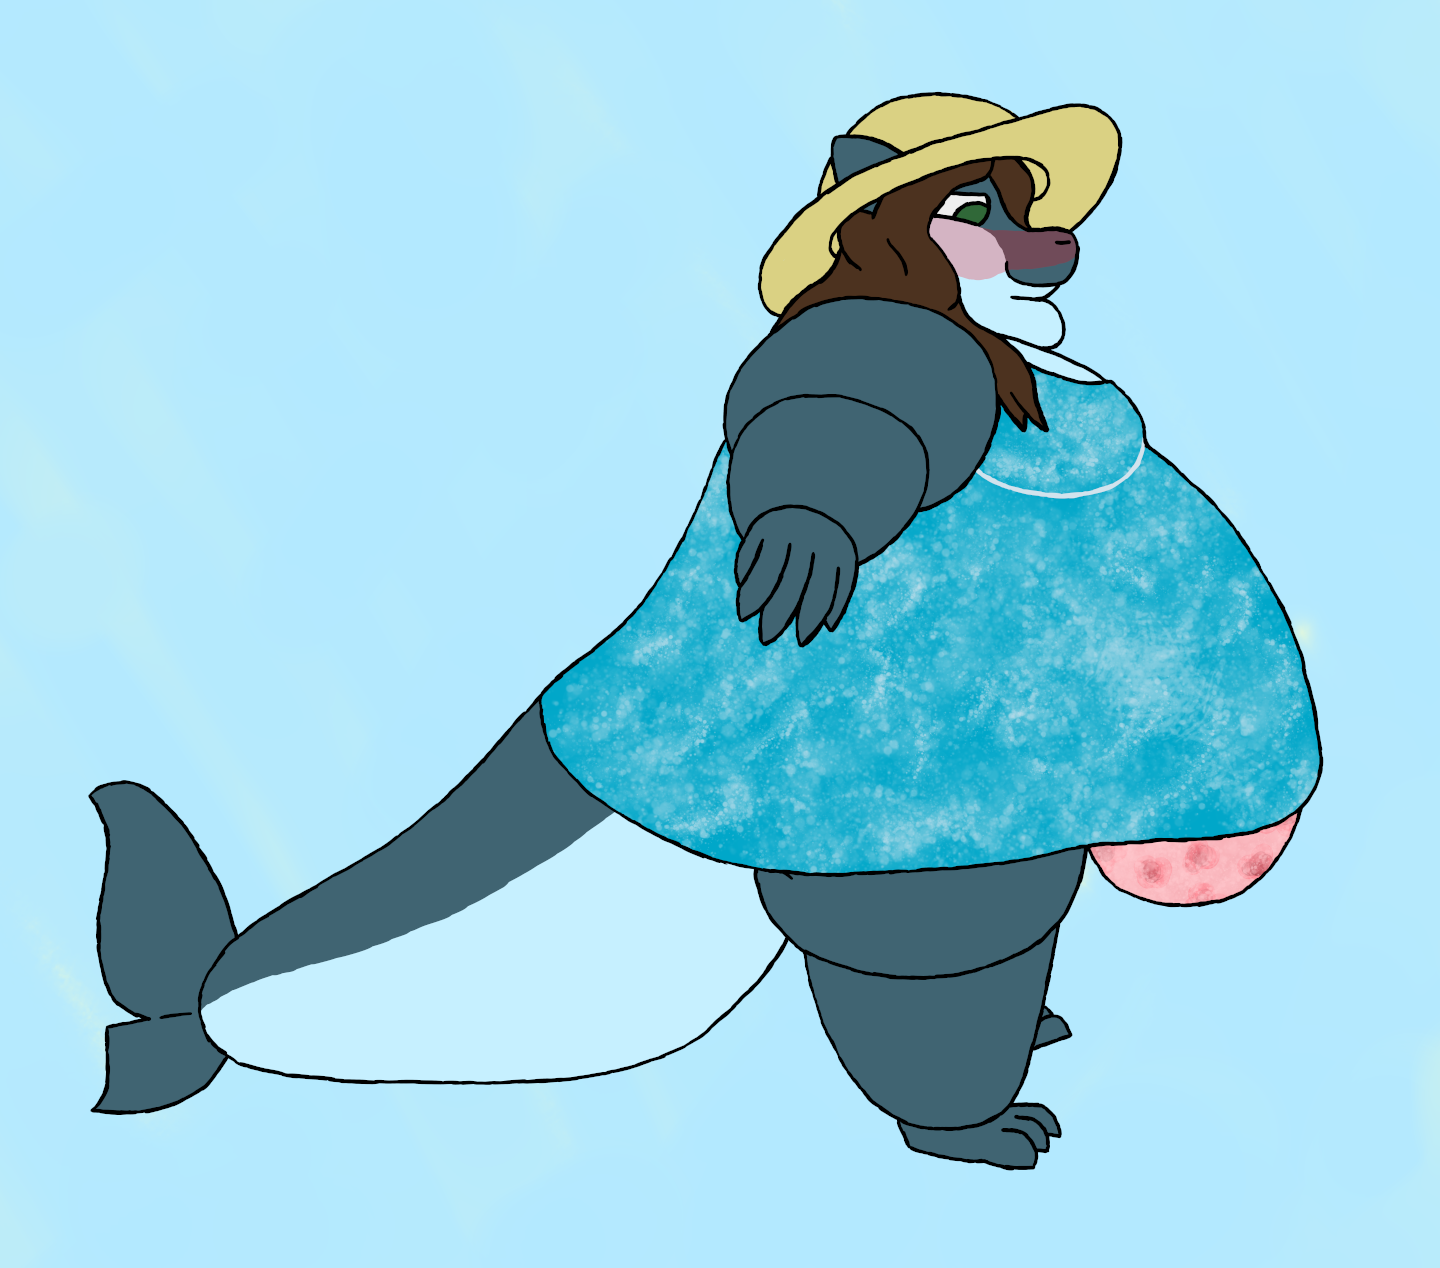 A very fat femboy shark wearing a blue, marbled swim dress. He's also wearing a pink floral swim bottom to contain the belly that his dress doesn't cover, and a sun hat. He's smiling and blushing while looking like he's viewing himself in a mirror.